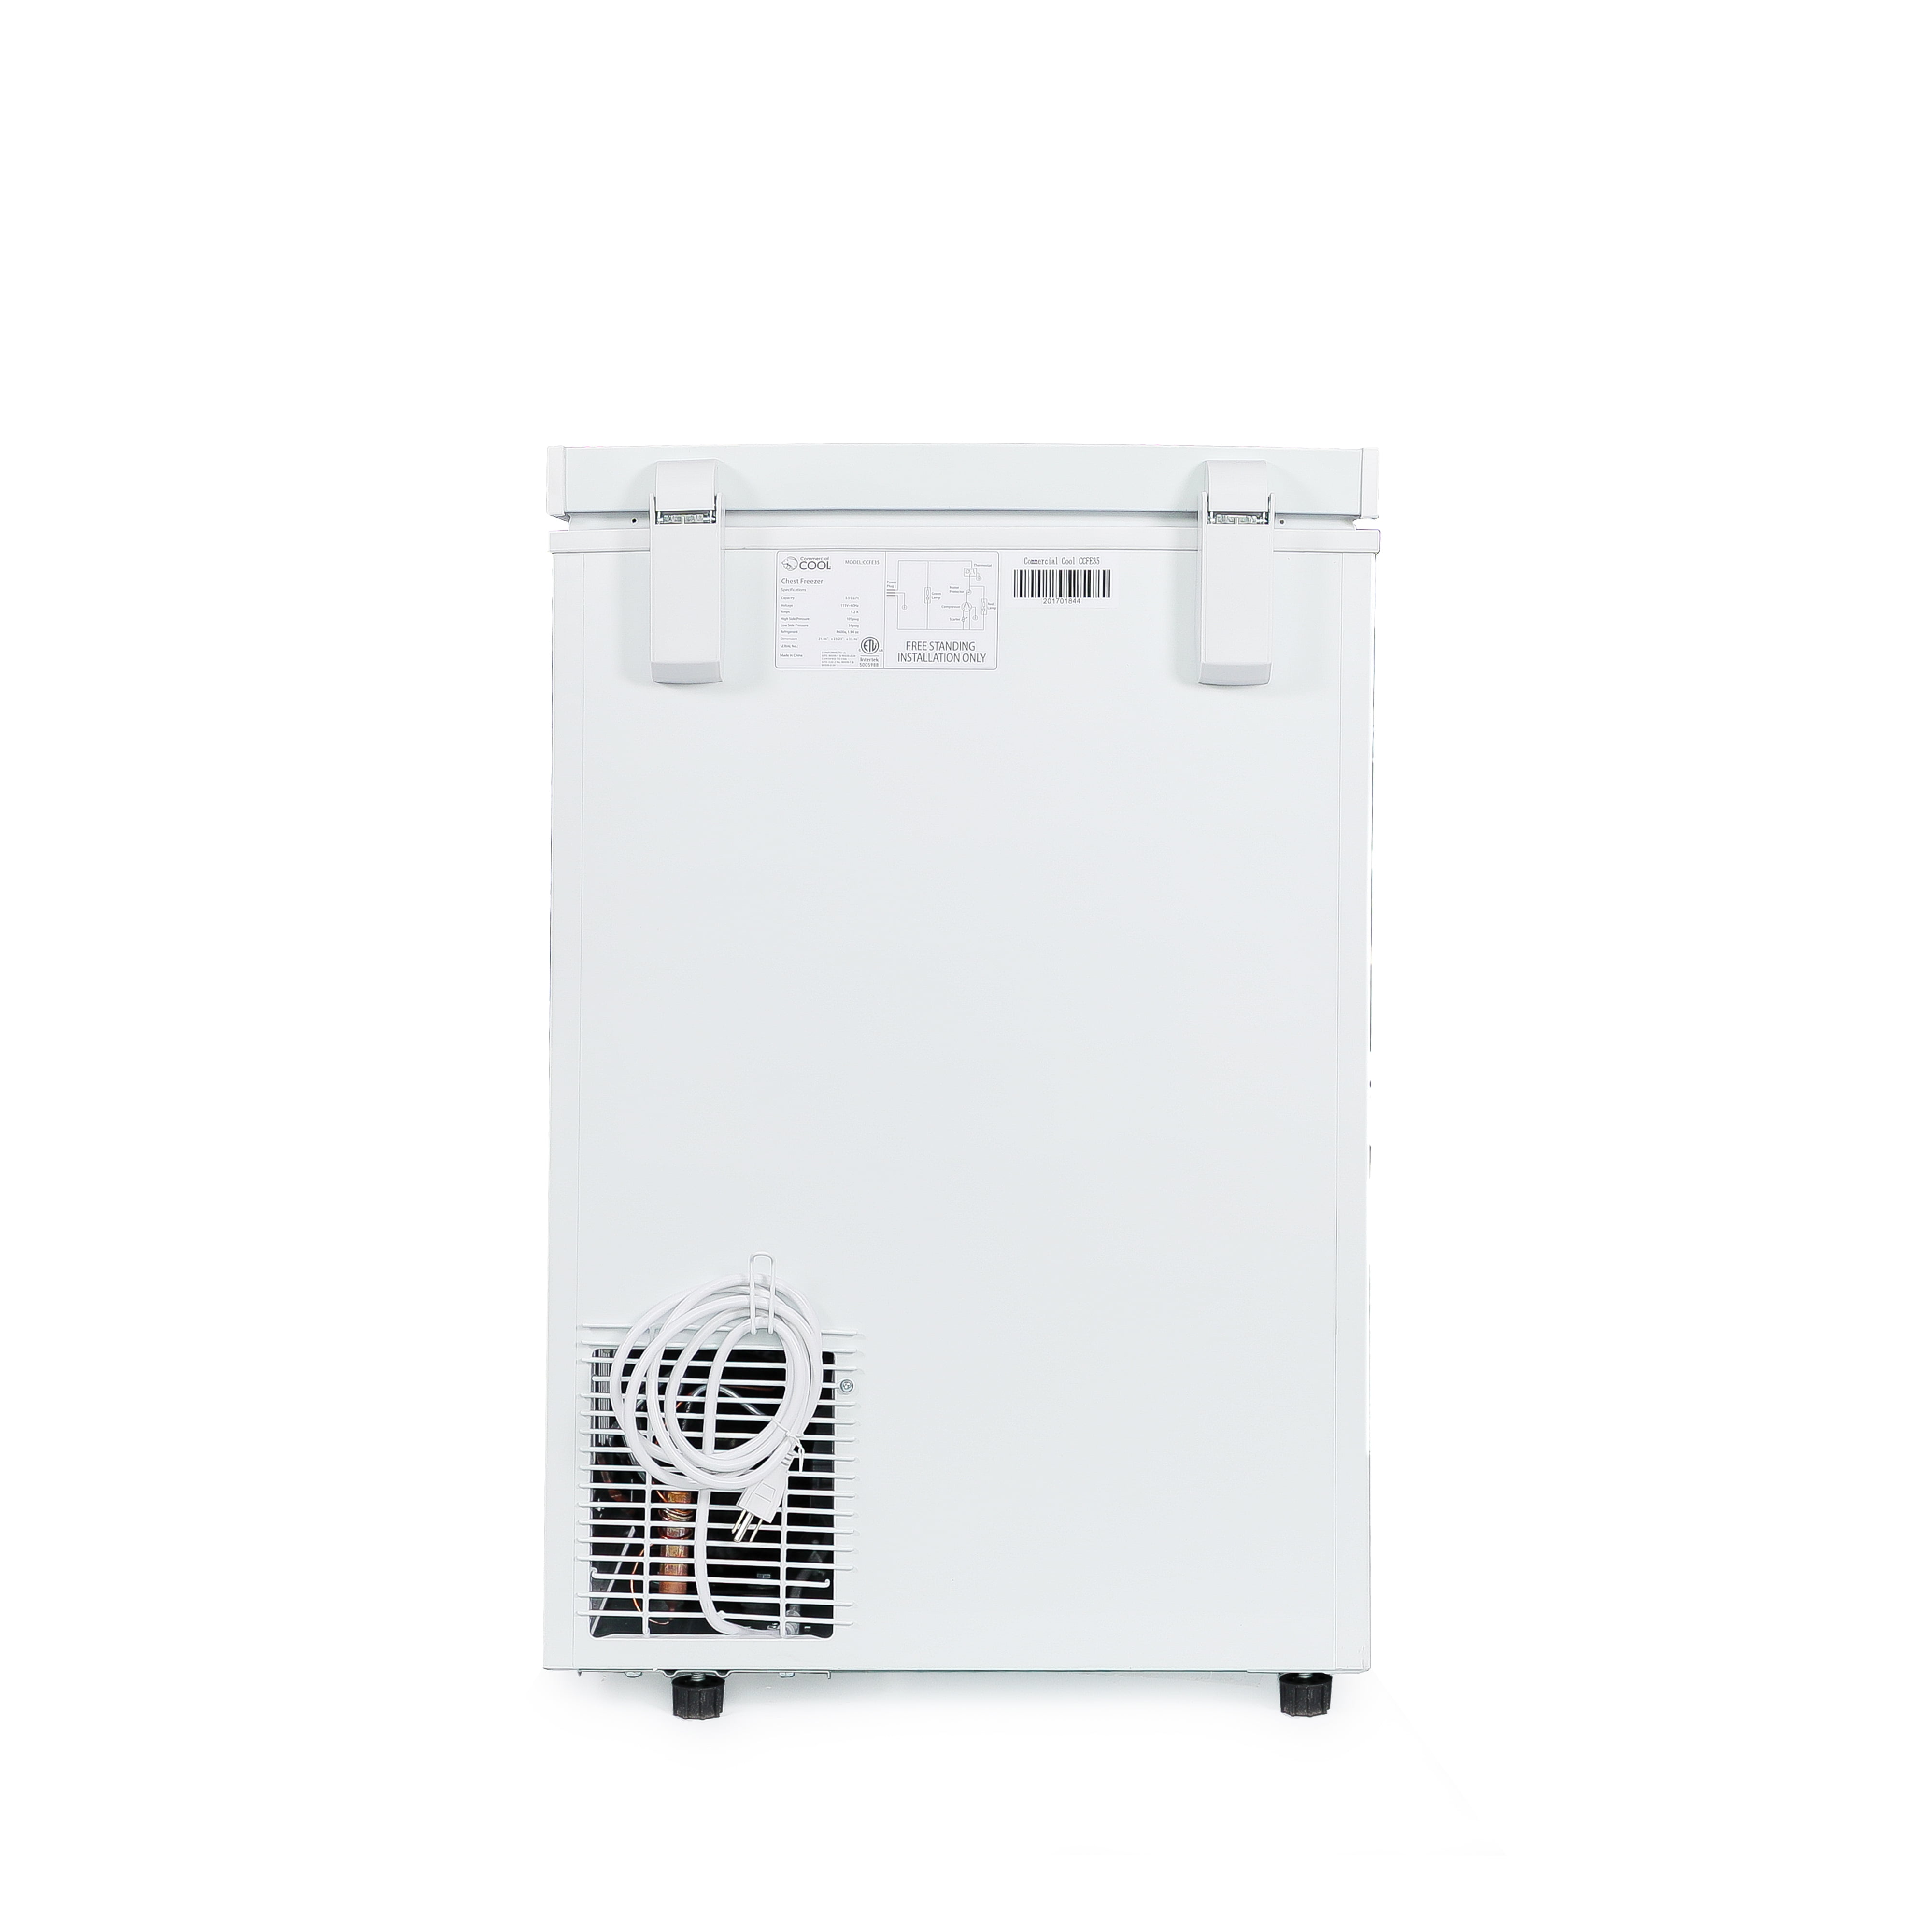 Commercial Cool 5.1 Cu. Ft Chest Freezer in White - BCFK516